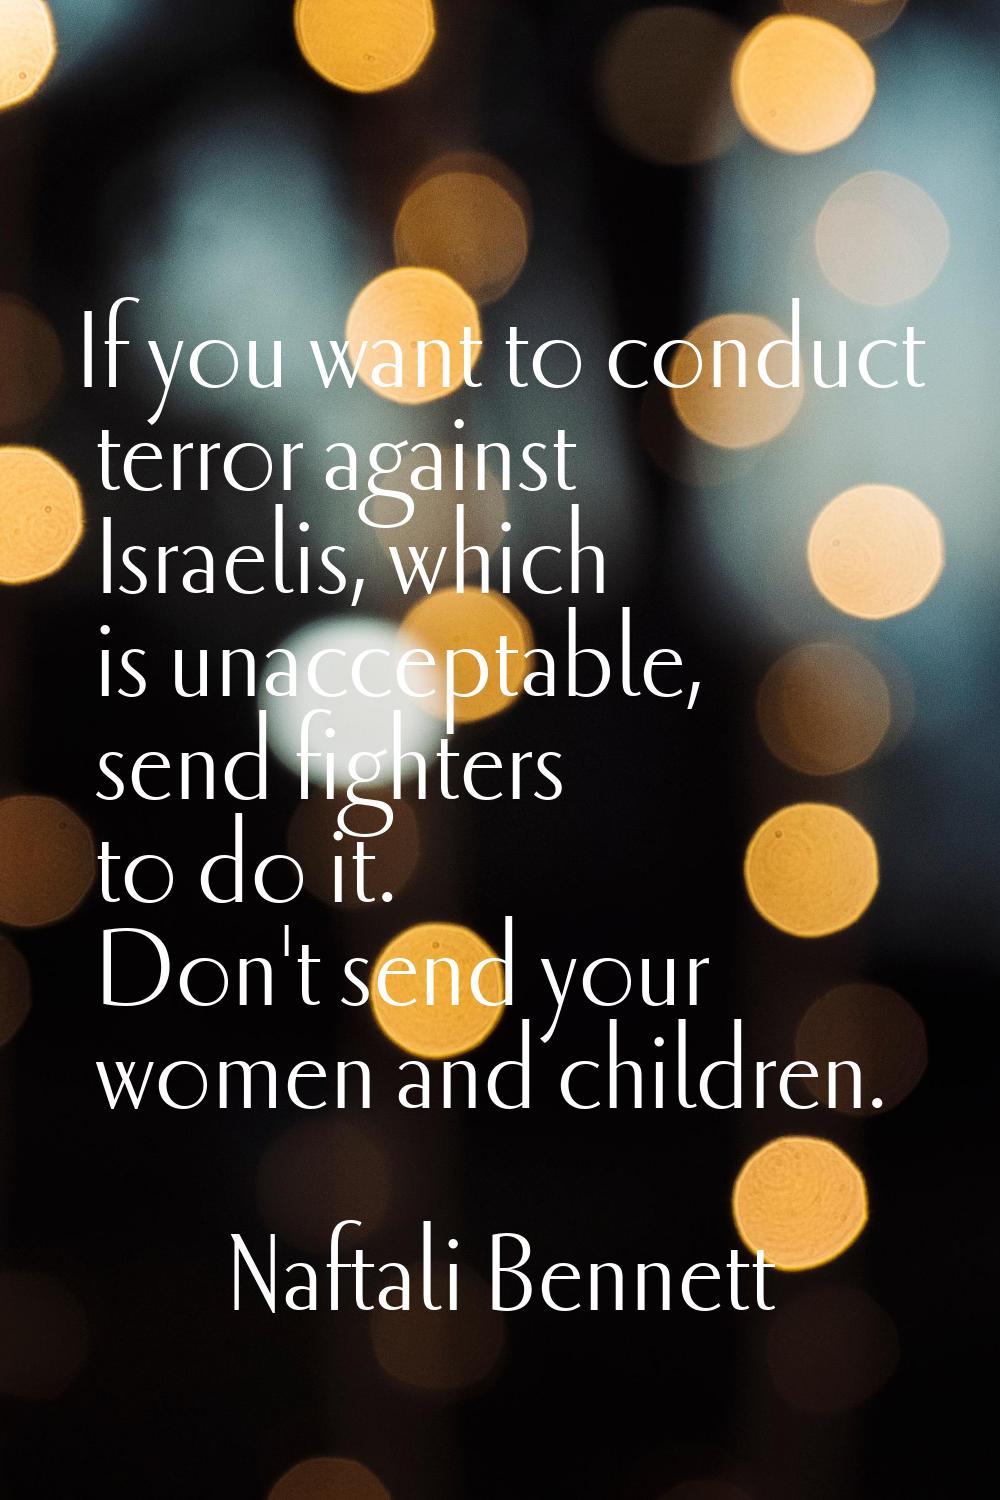 If you want to conduct terror against Israelis, which is unacceptable, send fighters to do it. Don'